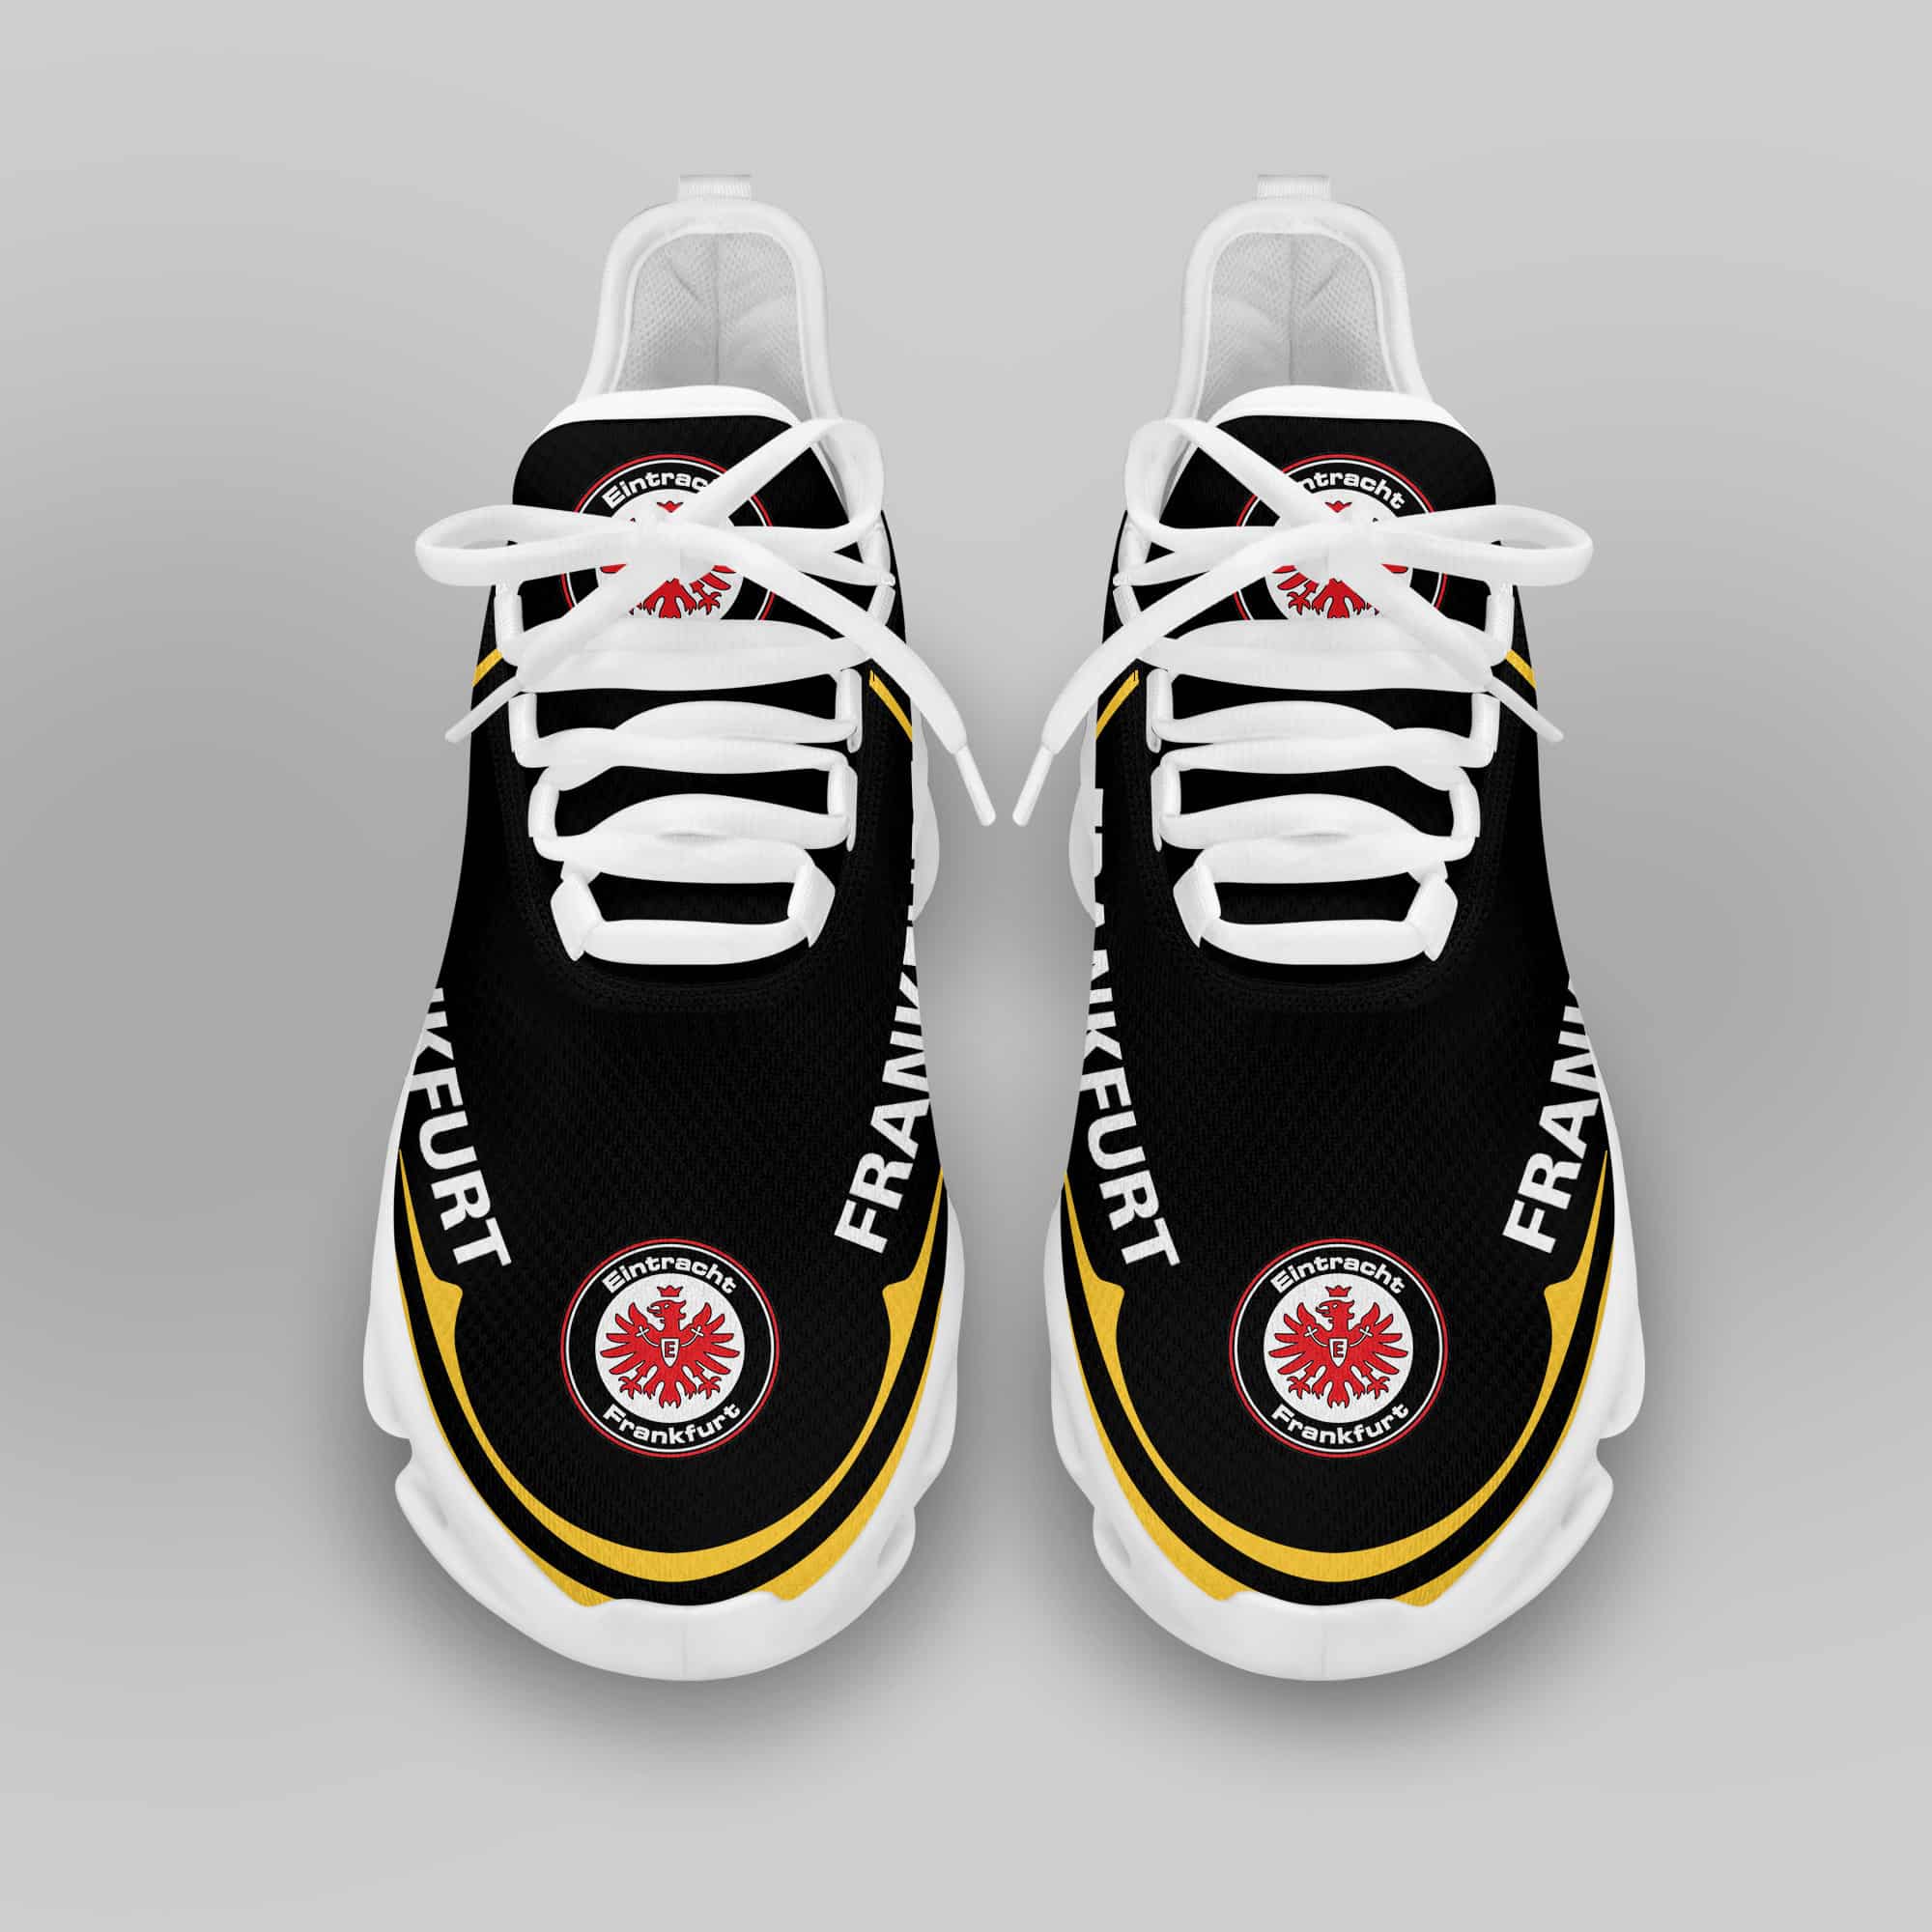 Eintracht Frankfurt Running Shoes Max Soul Shoes Sneakers Ver 22 3